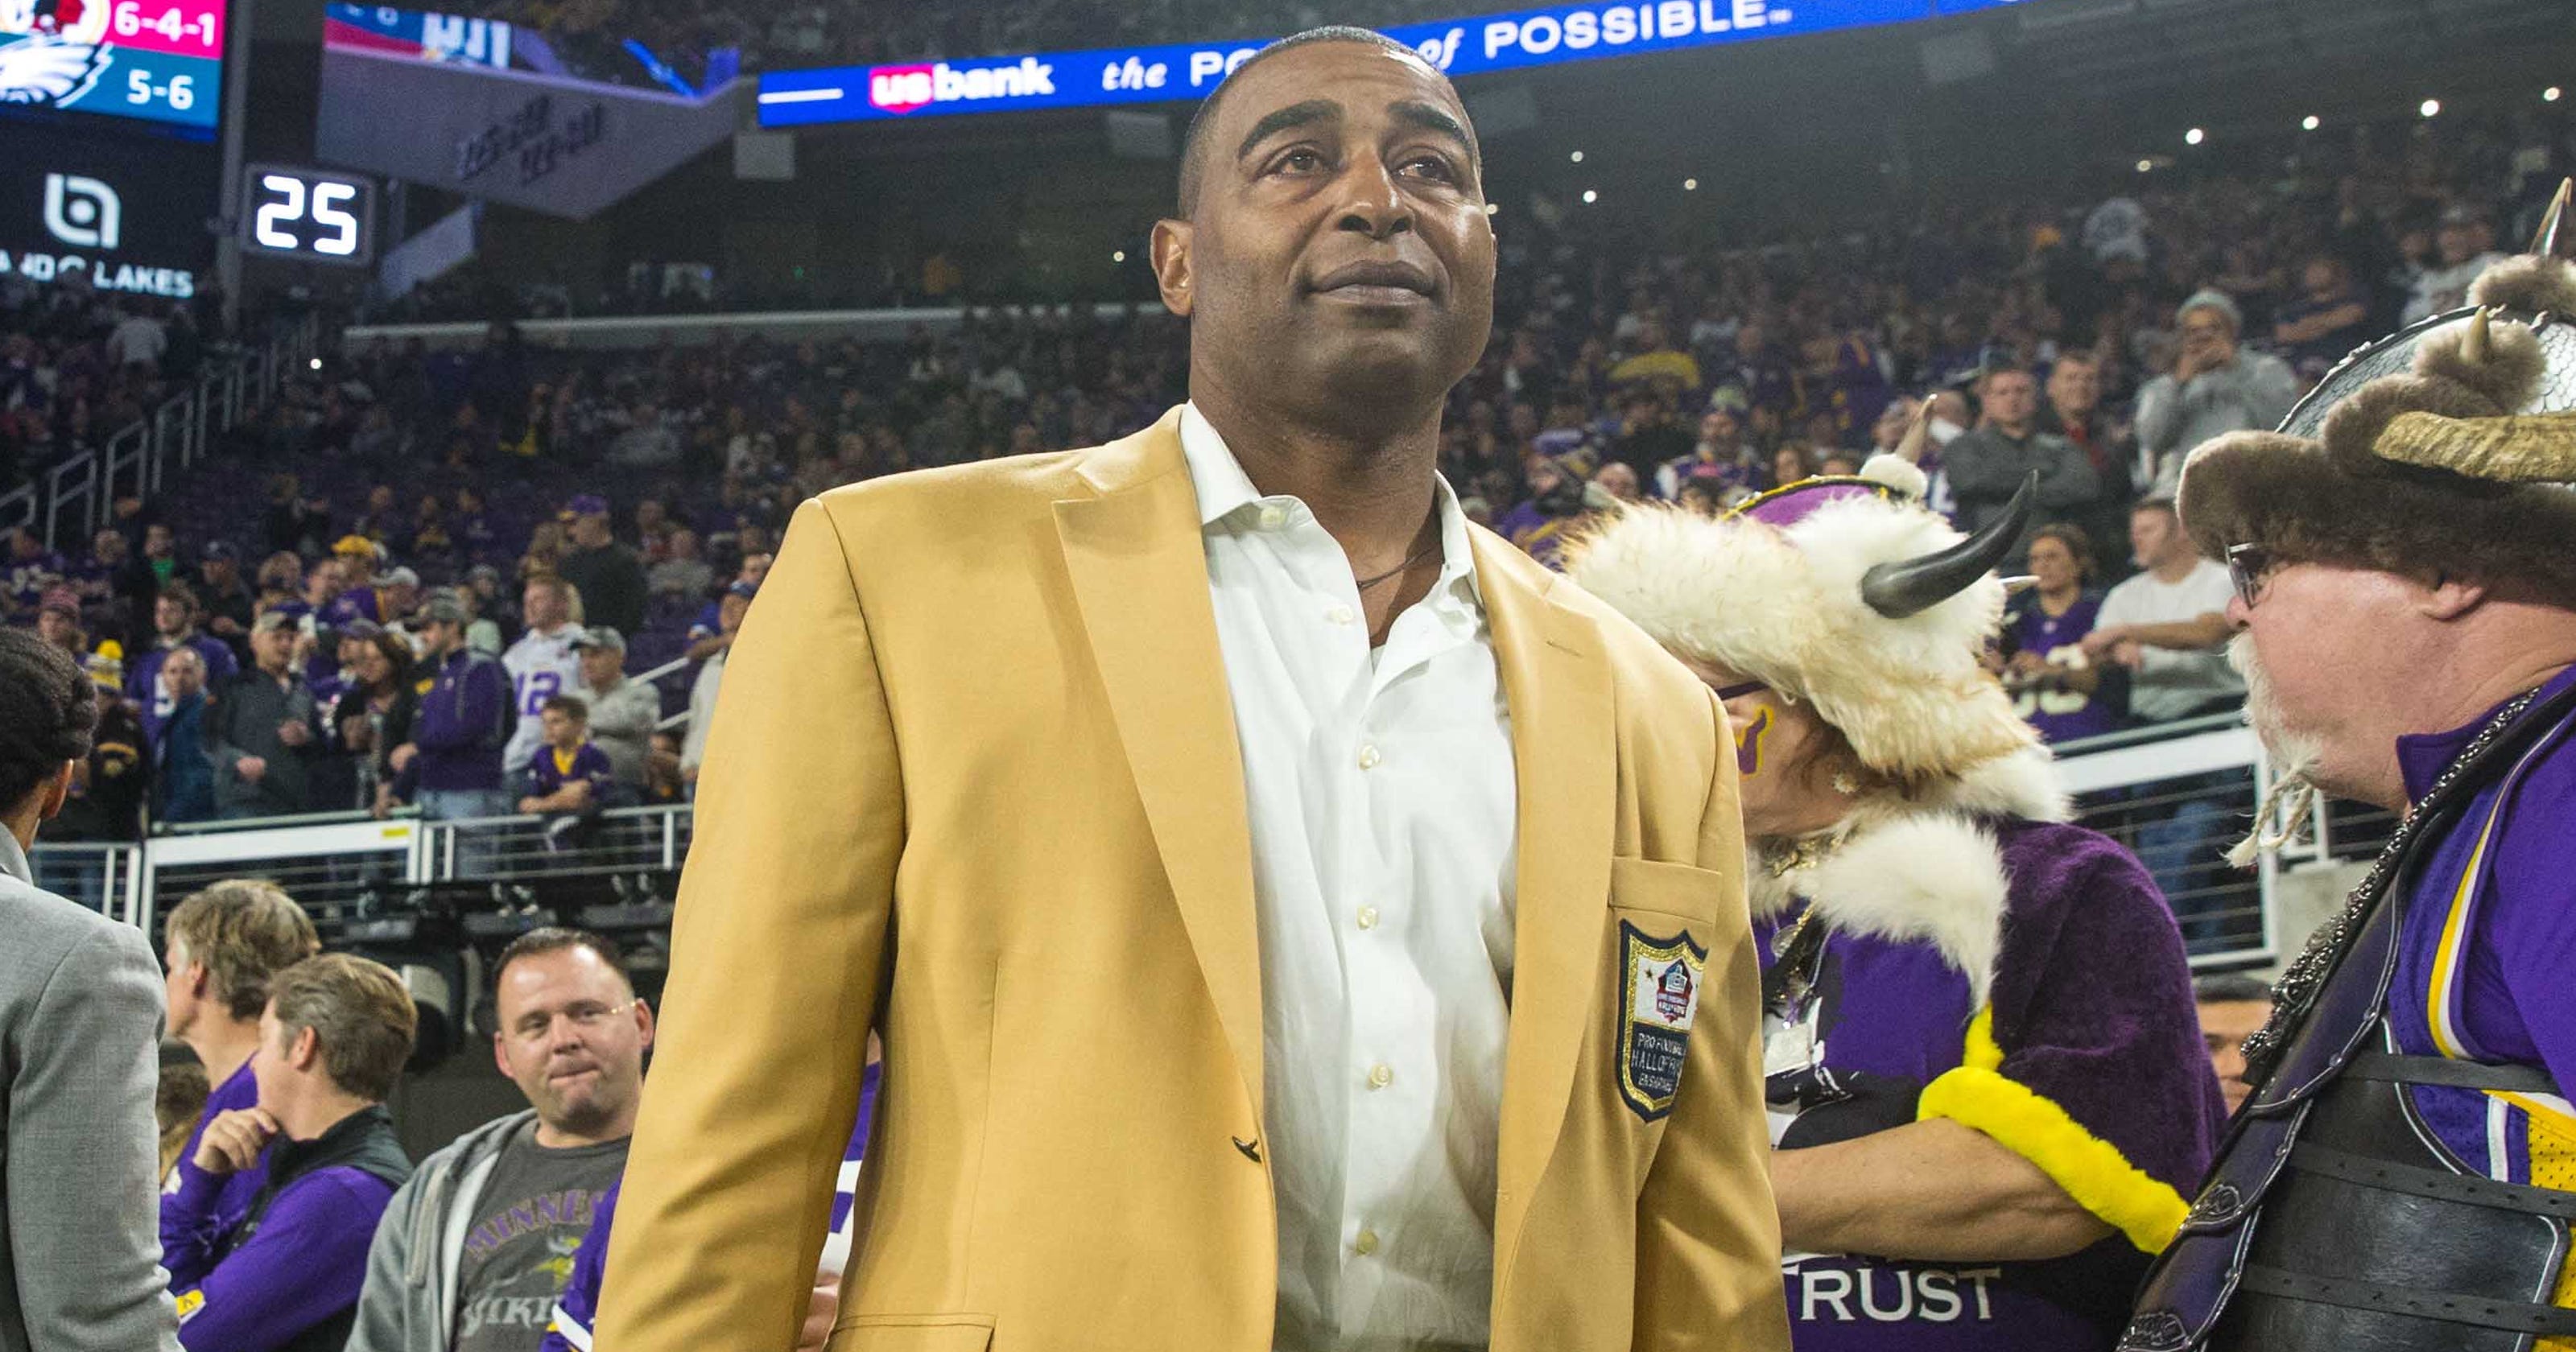 Former ESPN talent Cris Carter to join Fox Sports as NFL analyst